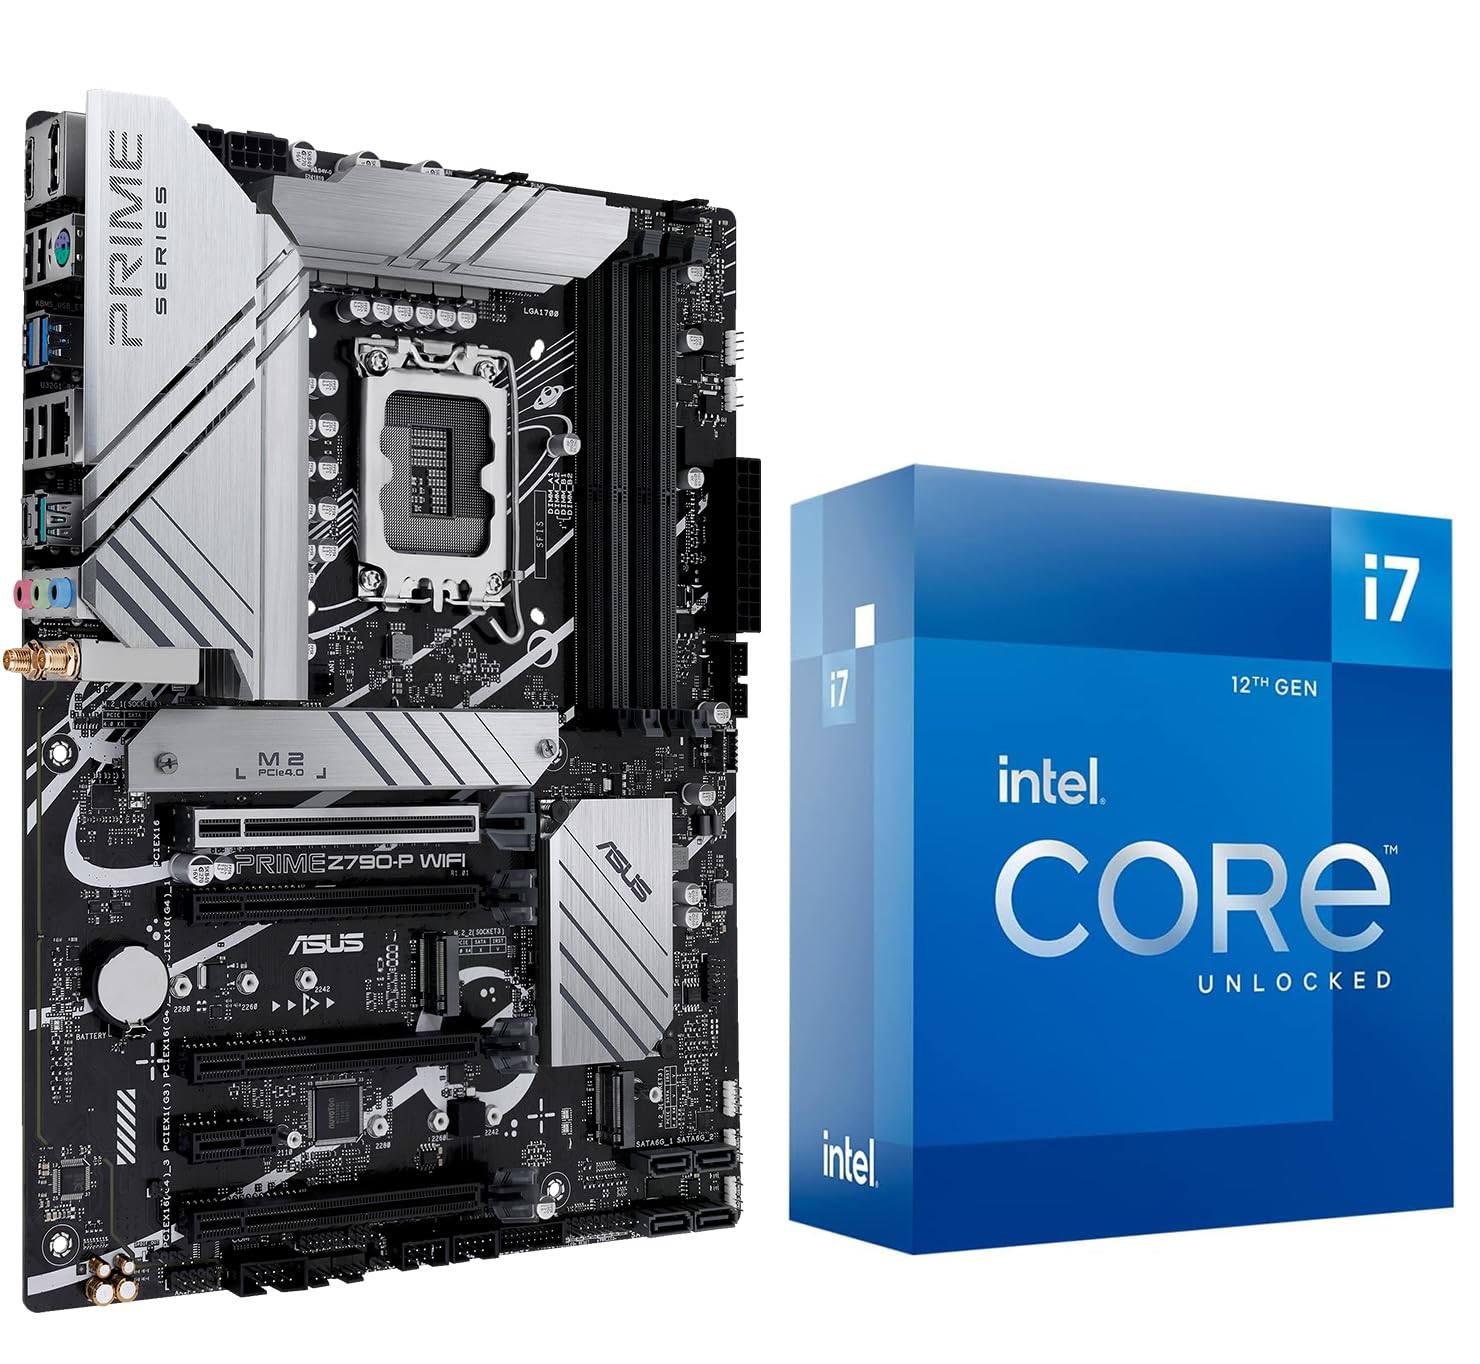 $399.99:  Intel i7-12700K cpu + ASUS Prime Z790-P WiFi DDR5 motherboard + Free Shipping